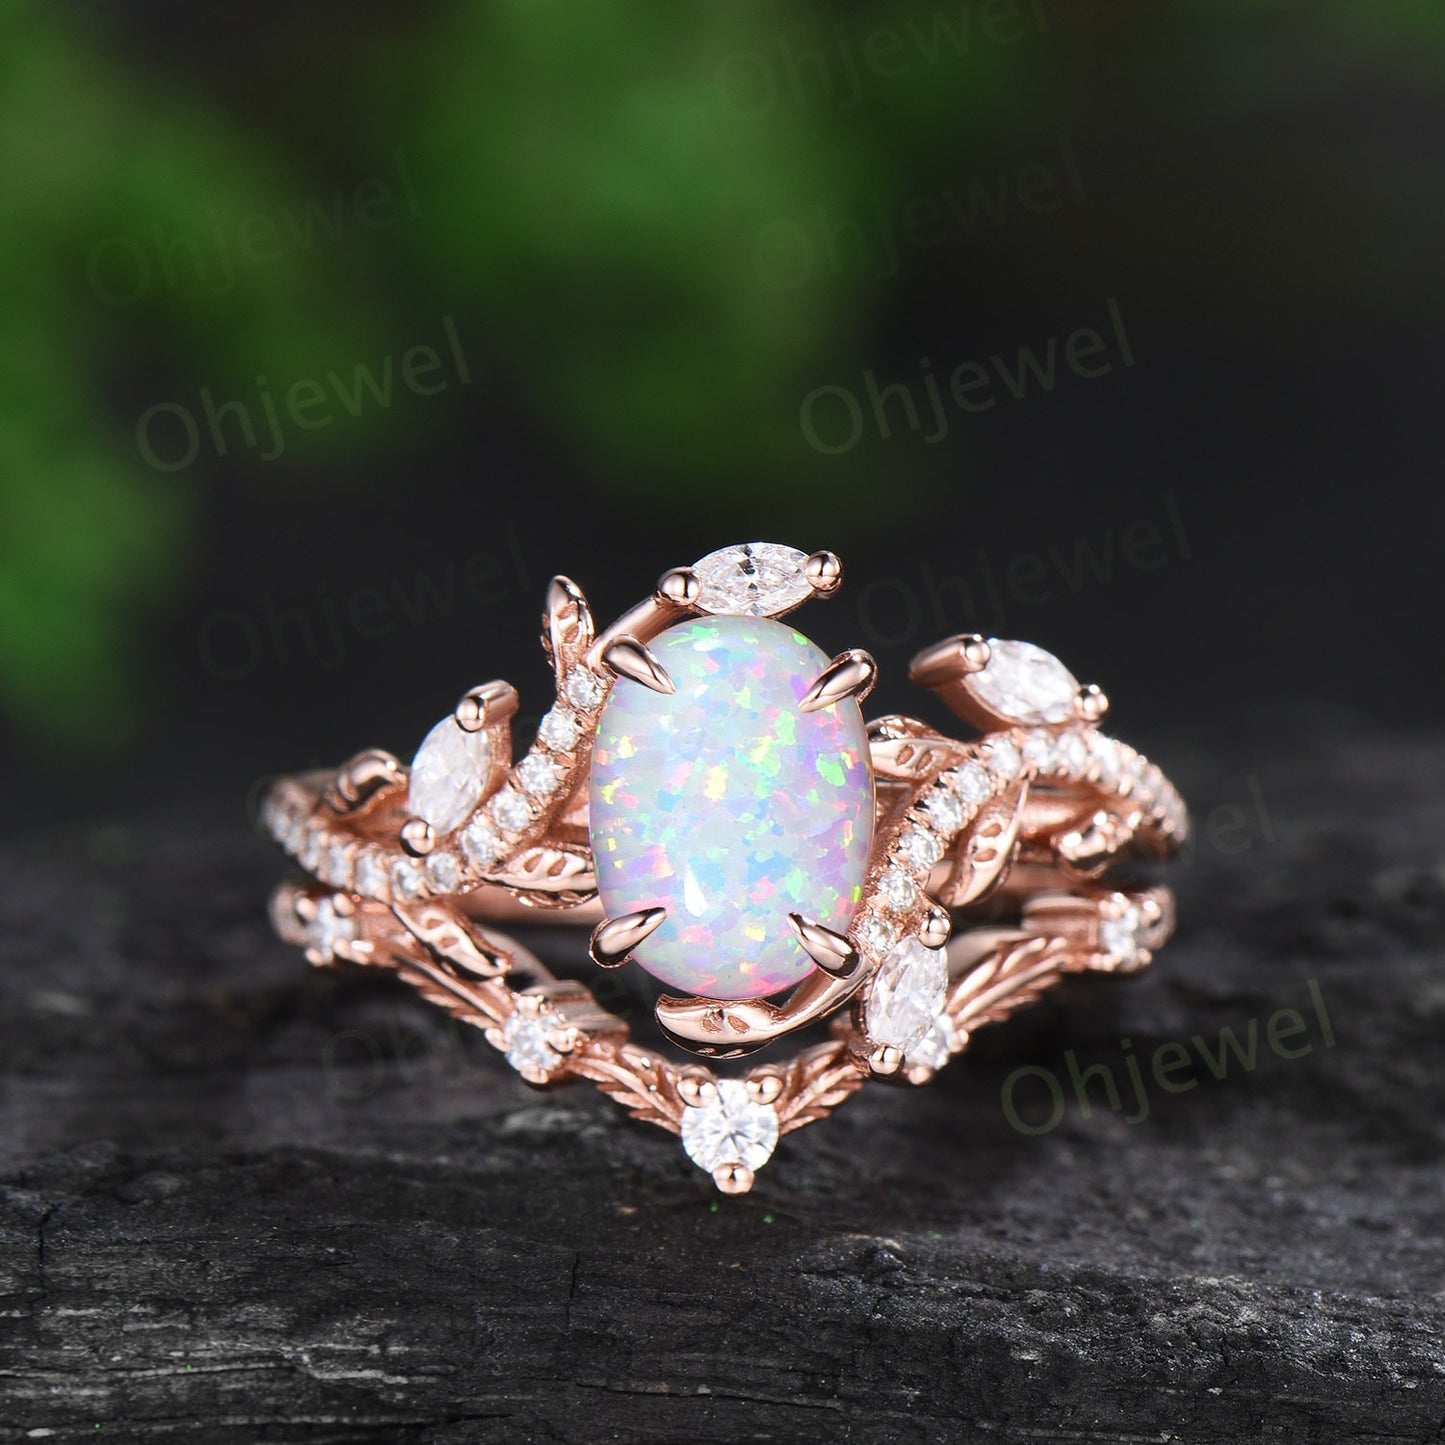 Oval white opal ring vintage rose gold leaf nature inspired unique engagement ring half eternity diamond anniversary ring set gift for women